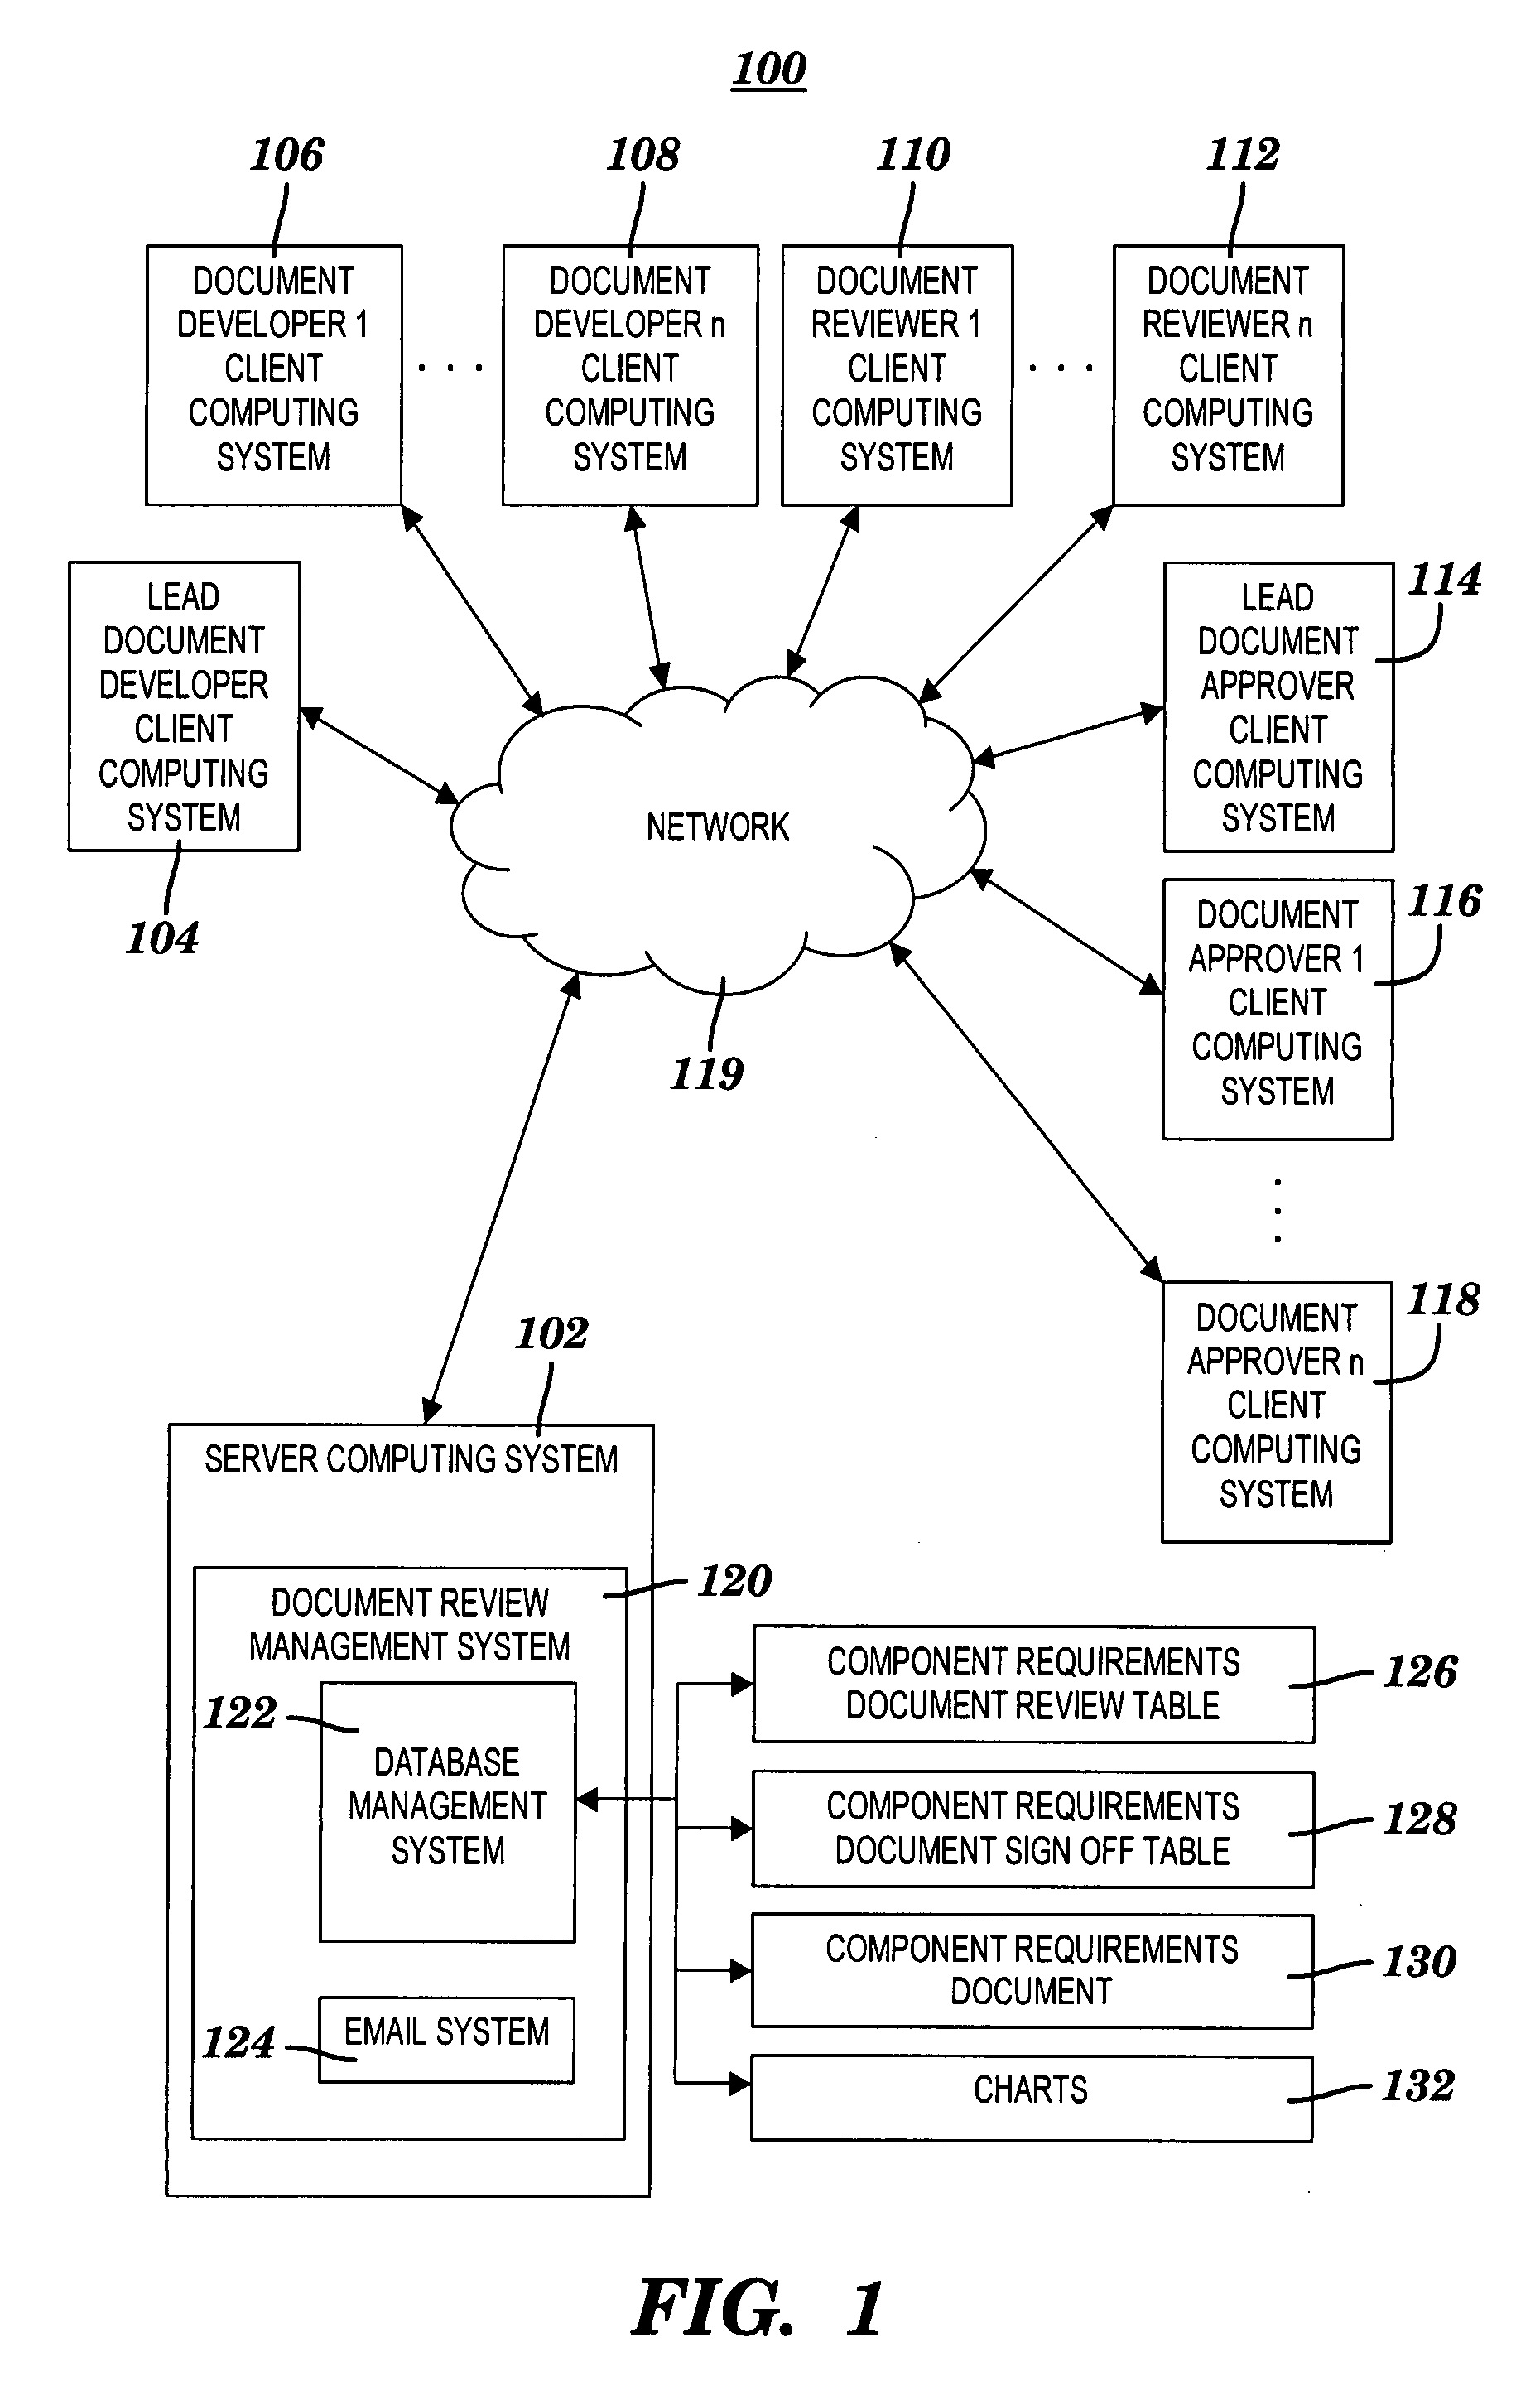 Method and system for reviewing a component requirements document and for recording approvals thereof